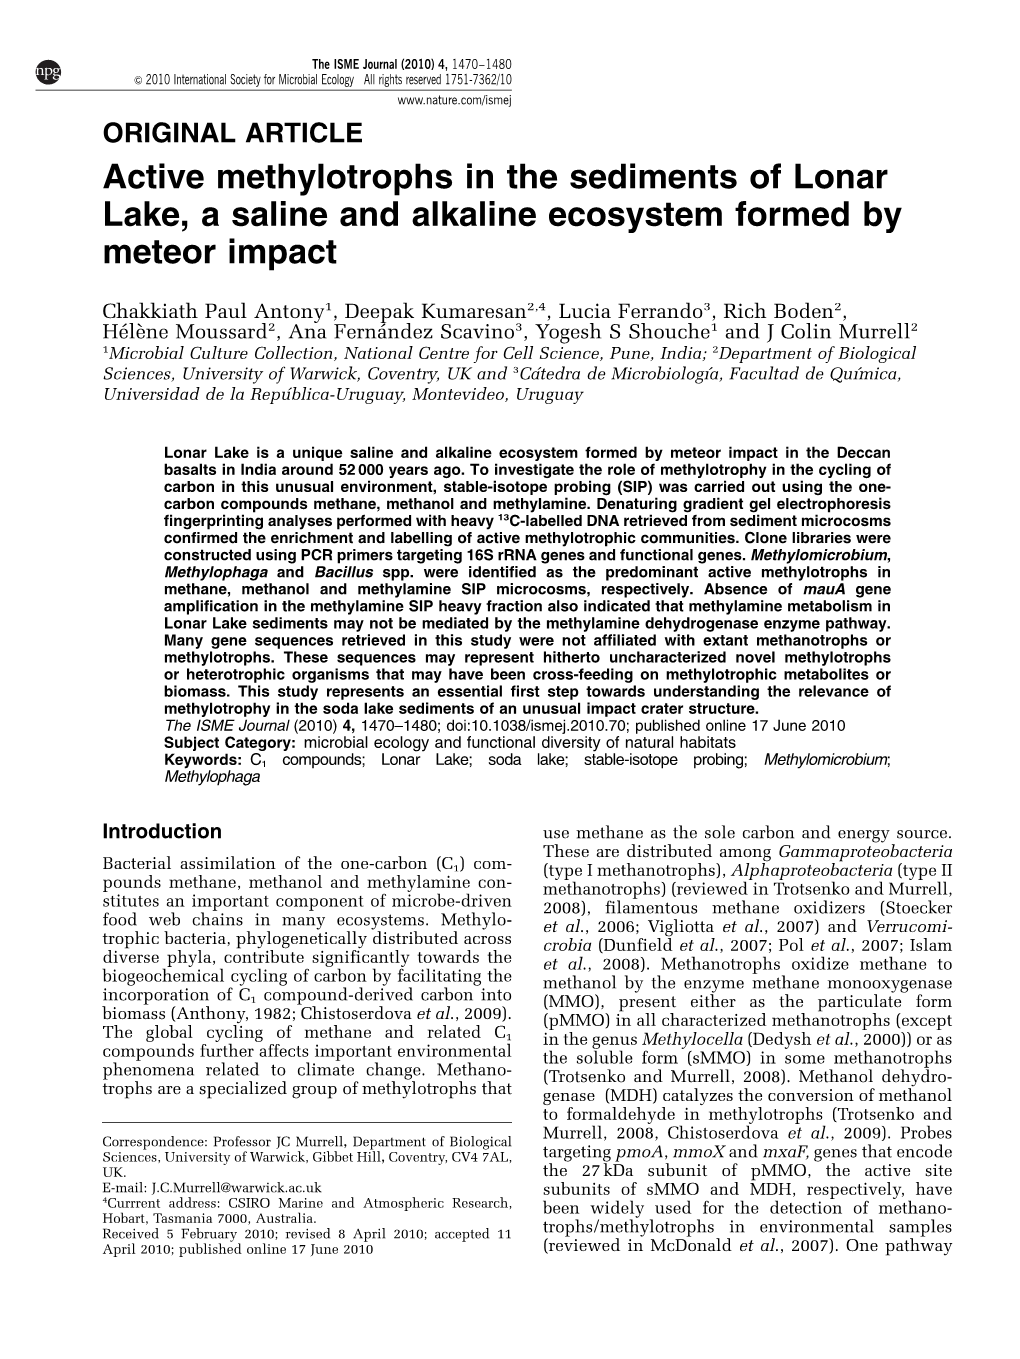 Active Methylotrophs in the Sediments of Lonar Lake, a Saline and Alkaline Ecosystem Formed by Meteor Impact